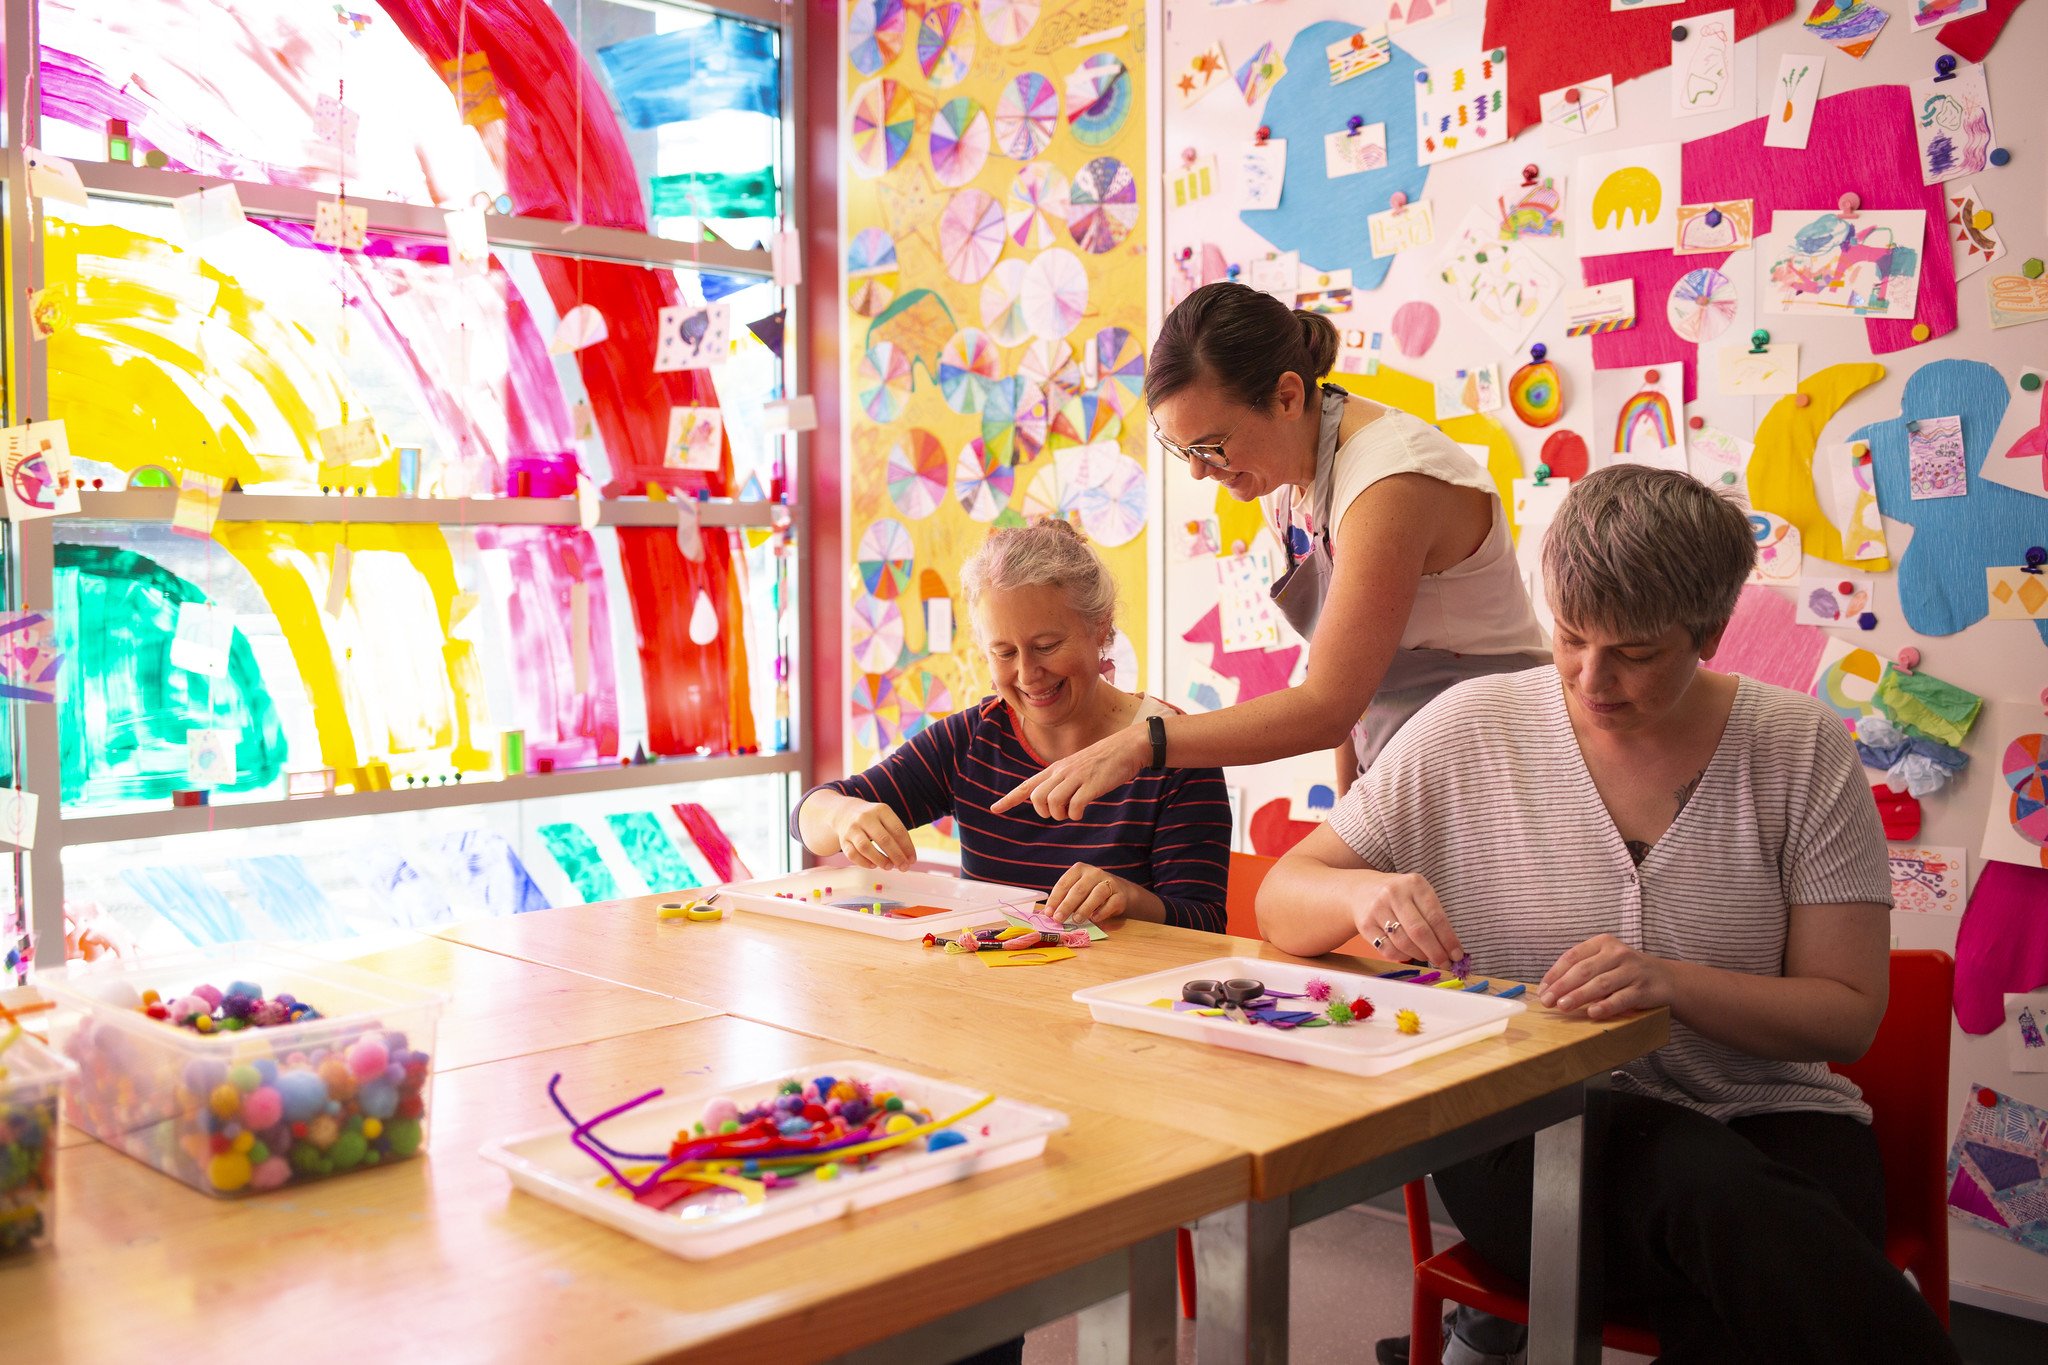 A person in an apron directs two people working on a craft with pom poms in a room decorated floor-to-ceiling in colorful art.